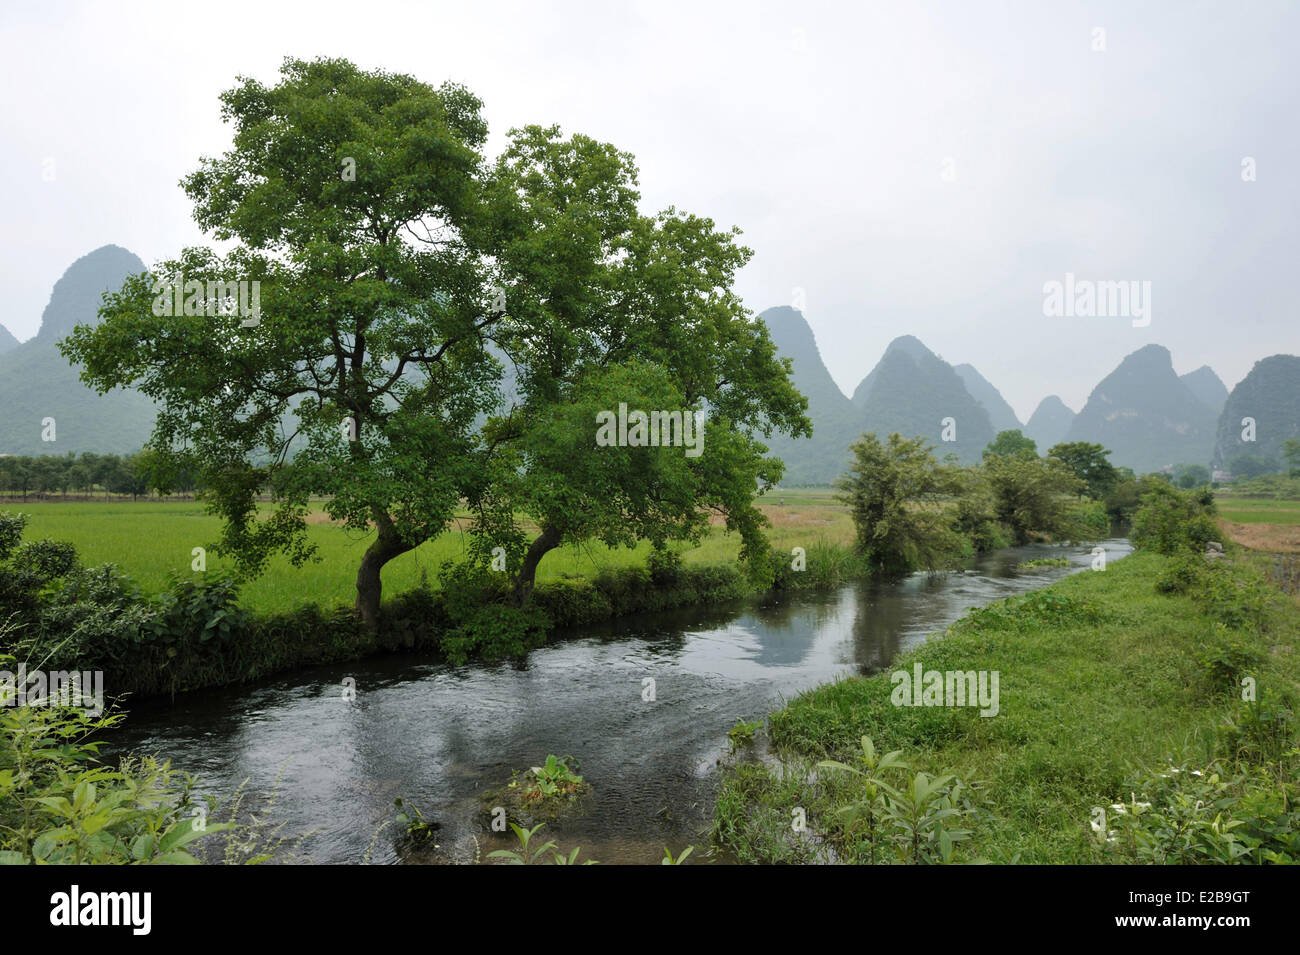 China, Guangxi province, Guilin region, Karst mountain and rice field landscape around Yangshuo Stock Photo